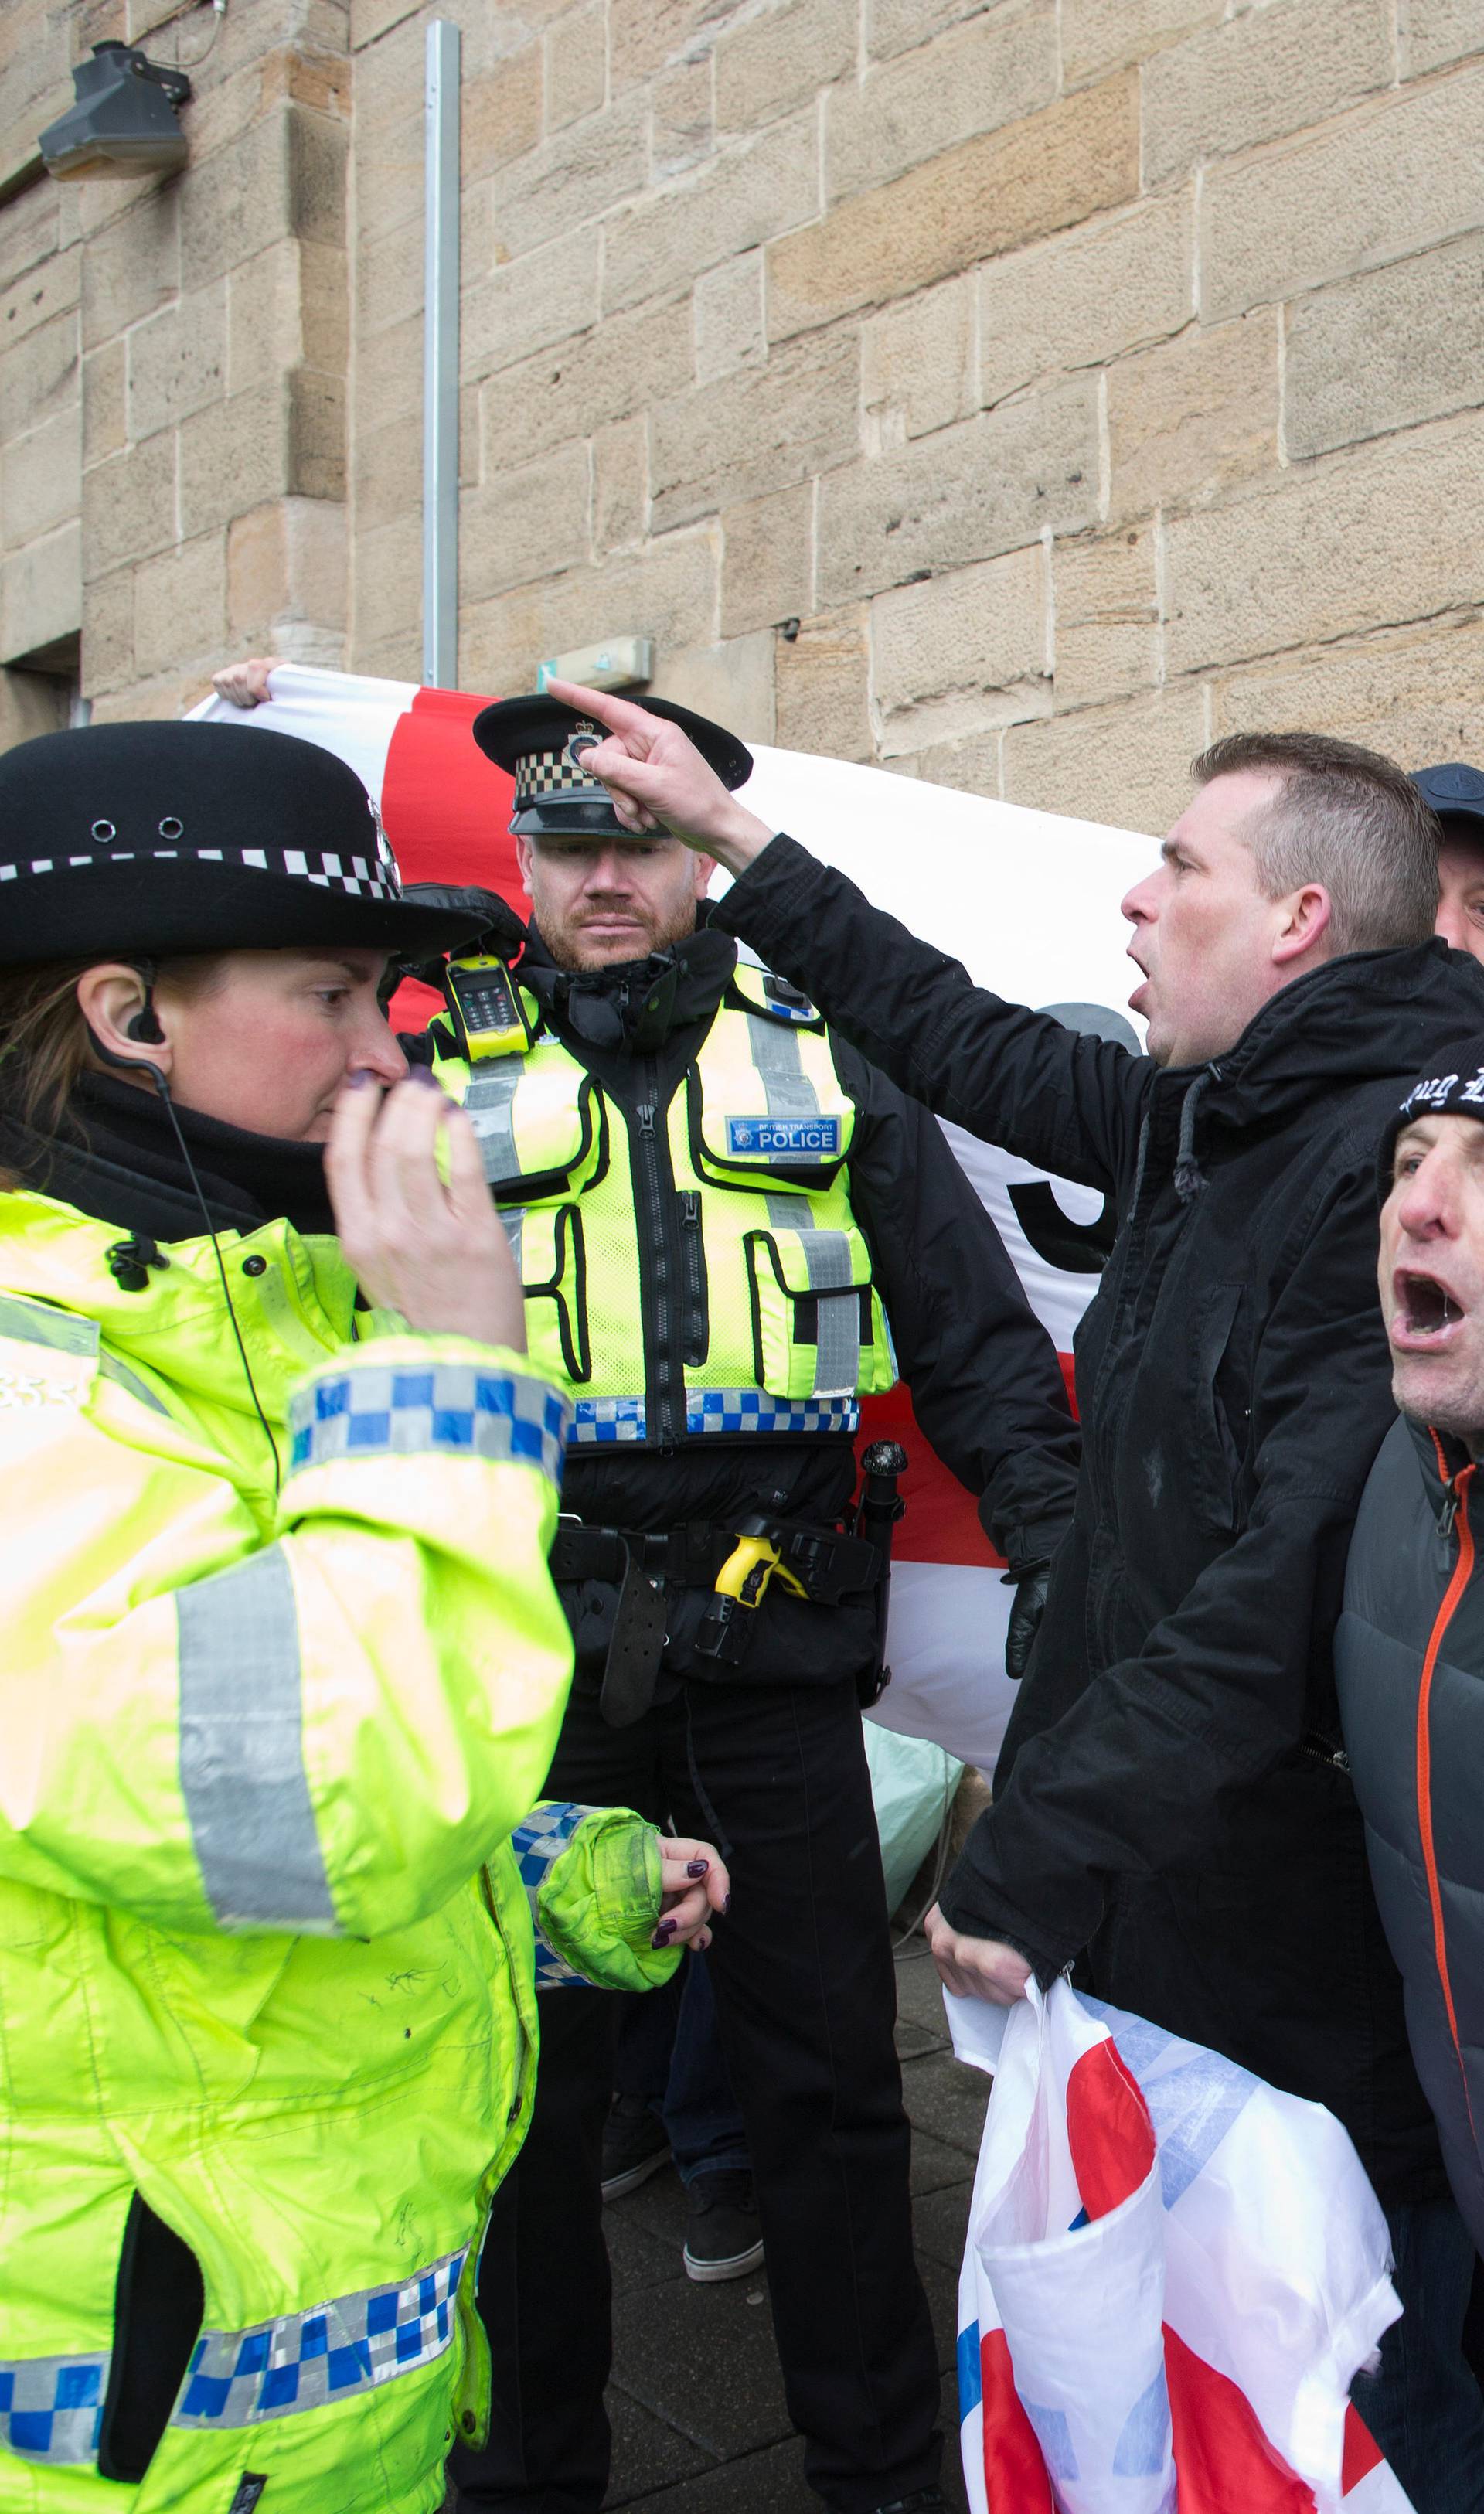 Right Wing fascists 'English Defence League' demonstrate outside the Brexit 'VOTE LEAVE' rally held by Boris Johnson MP campaigning to leave the Euro on June 23rd referendum, Newcastle-upon-Tyne, England UK